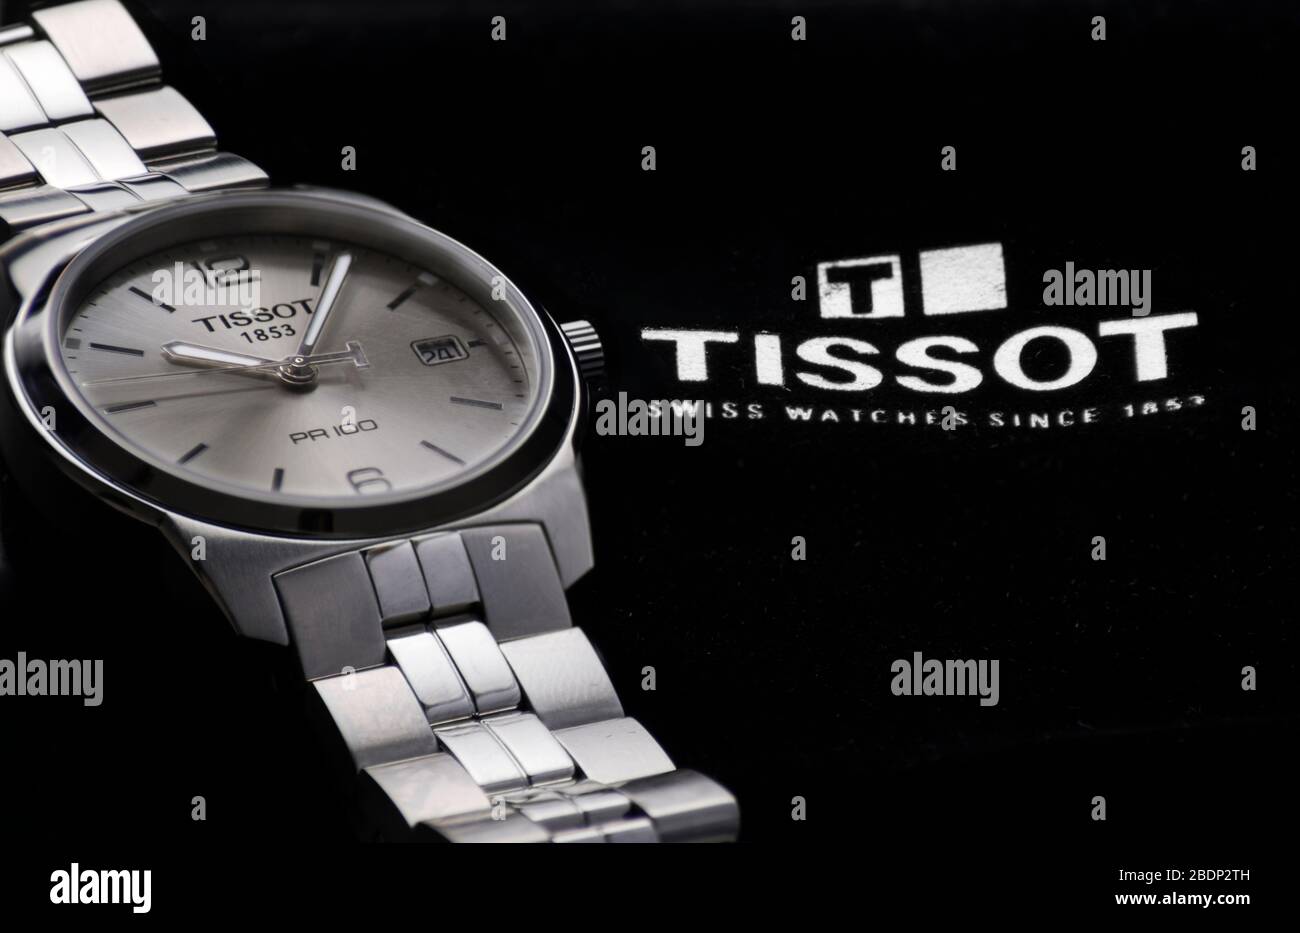 Alexandria, Egypt March 3, 2020 Tissot classic watch advertising with Tissot logo besides it Stock Photo